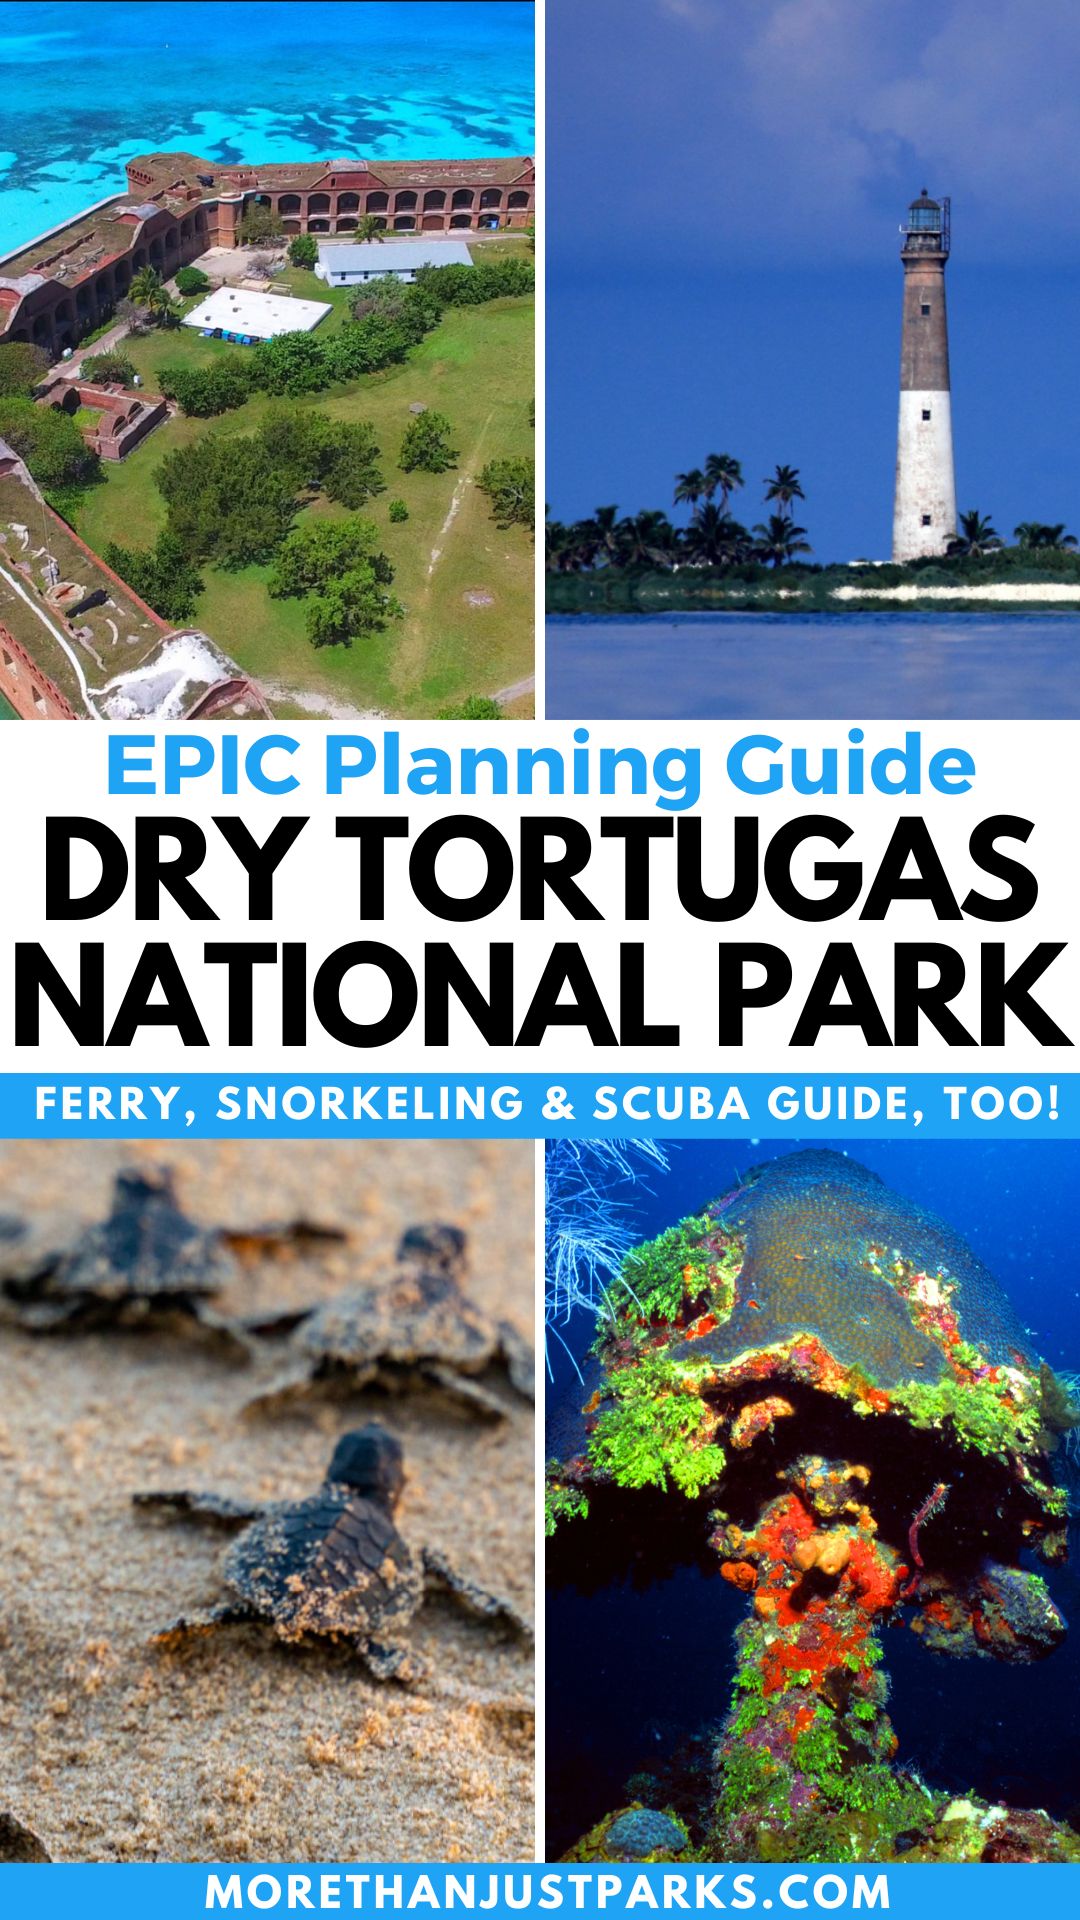 Epic Planning Guide Dry Tortugas National Park, Ferry, Snorkeling & Scuba Guide, Too!